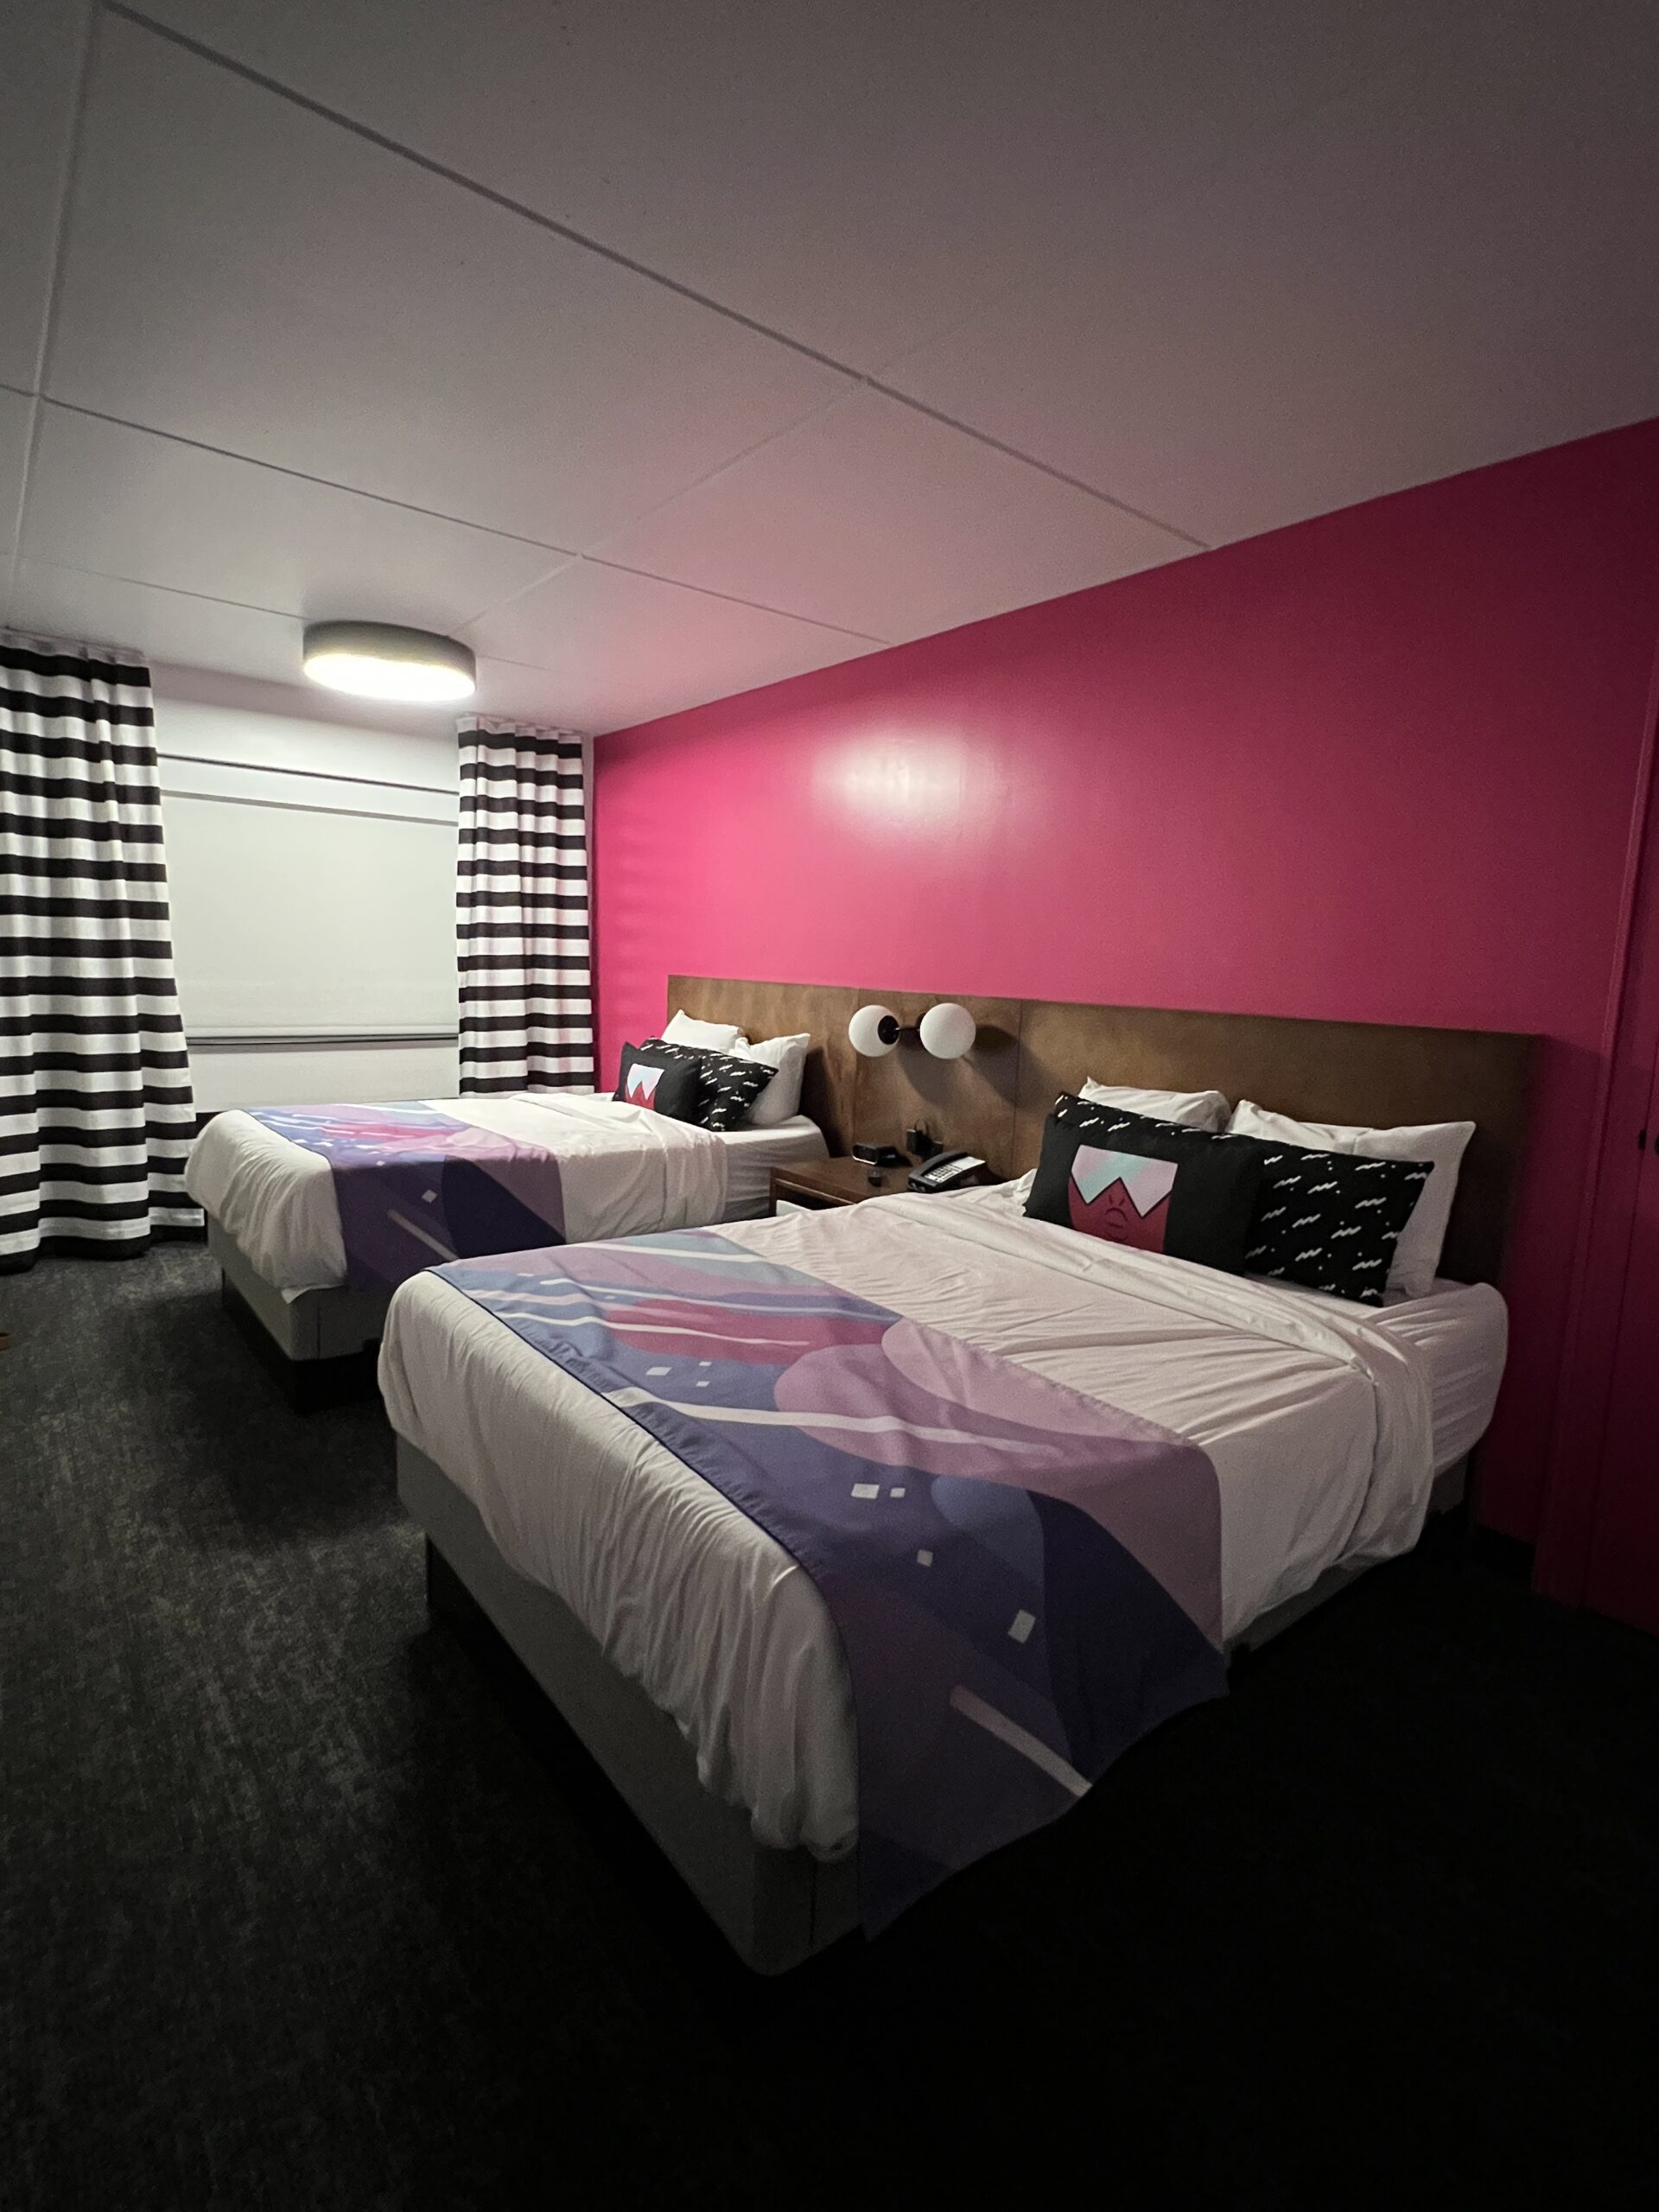 Cartoon Network Hotel: An Experience-Family Vacation Must » ToiTime